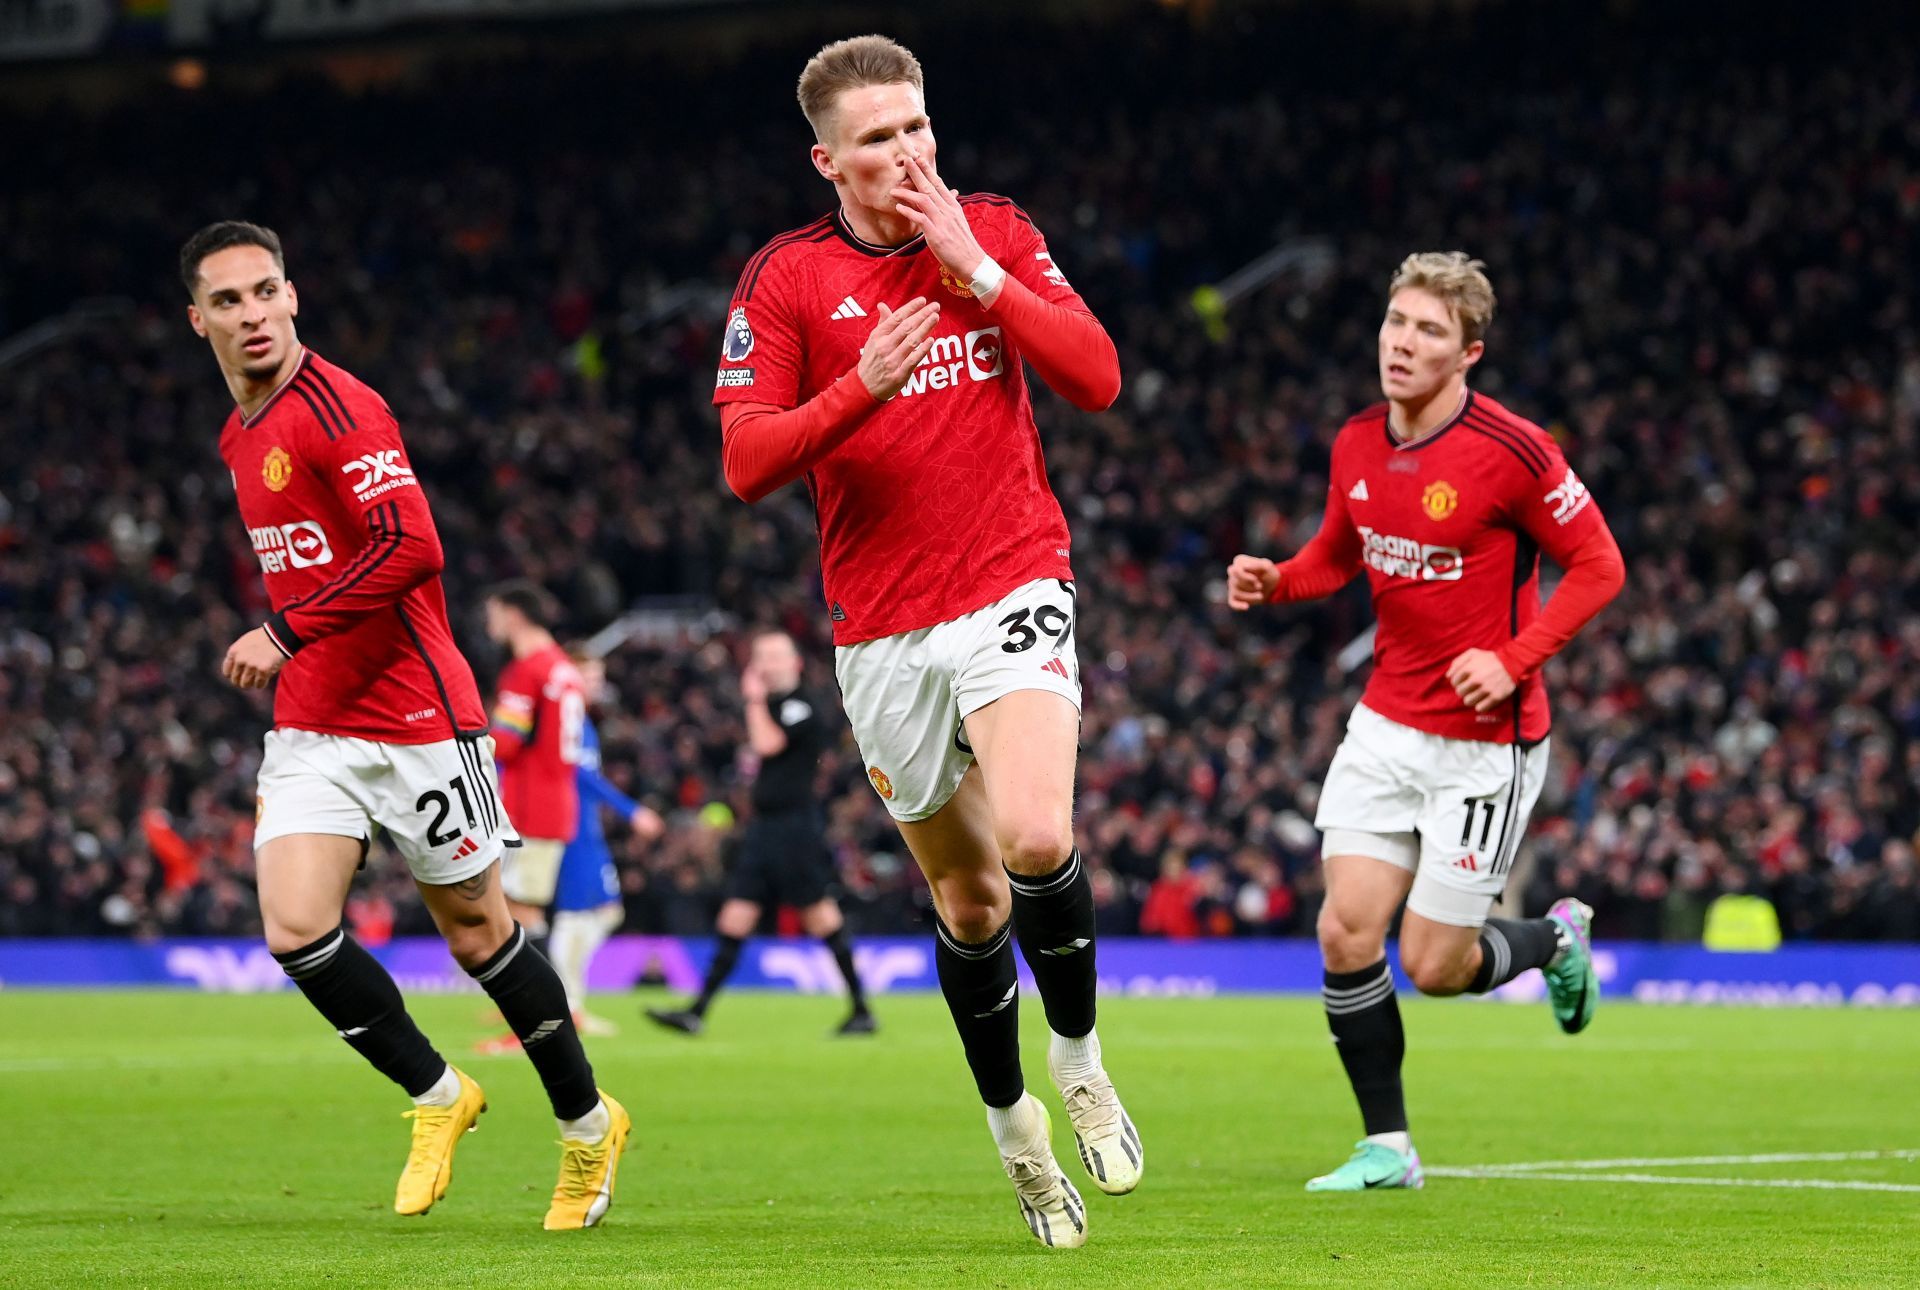 Scott McTominay earned comparisons with the Chelsea legend.